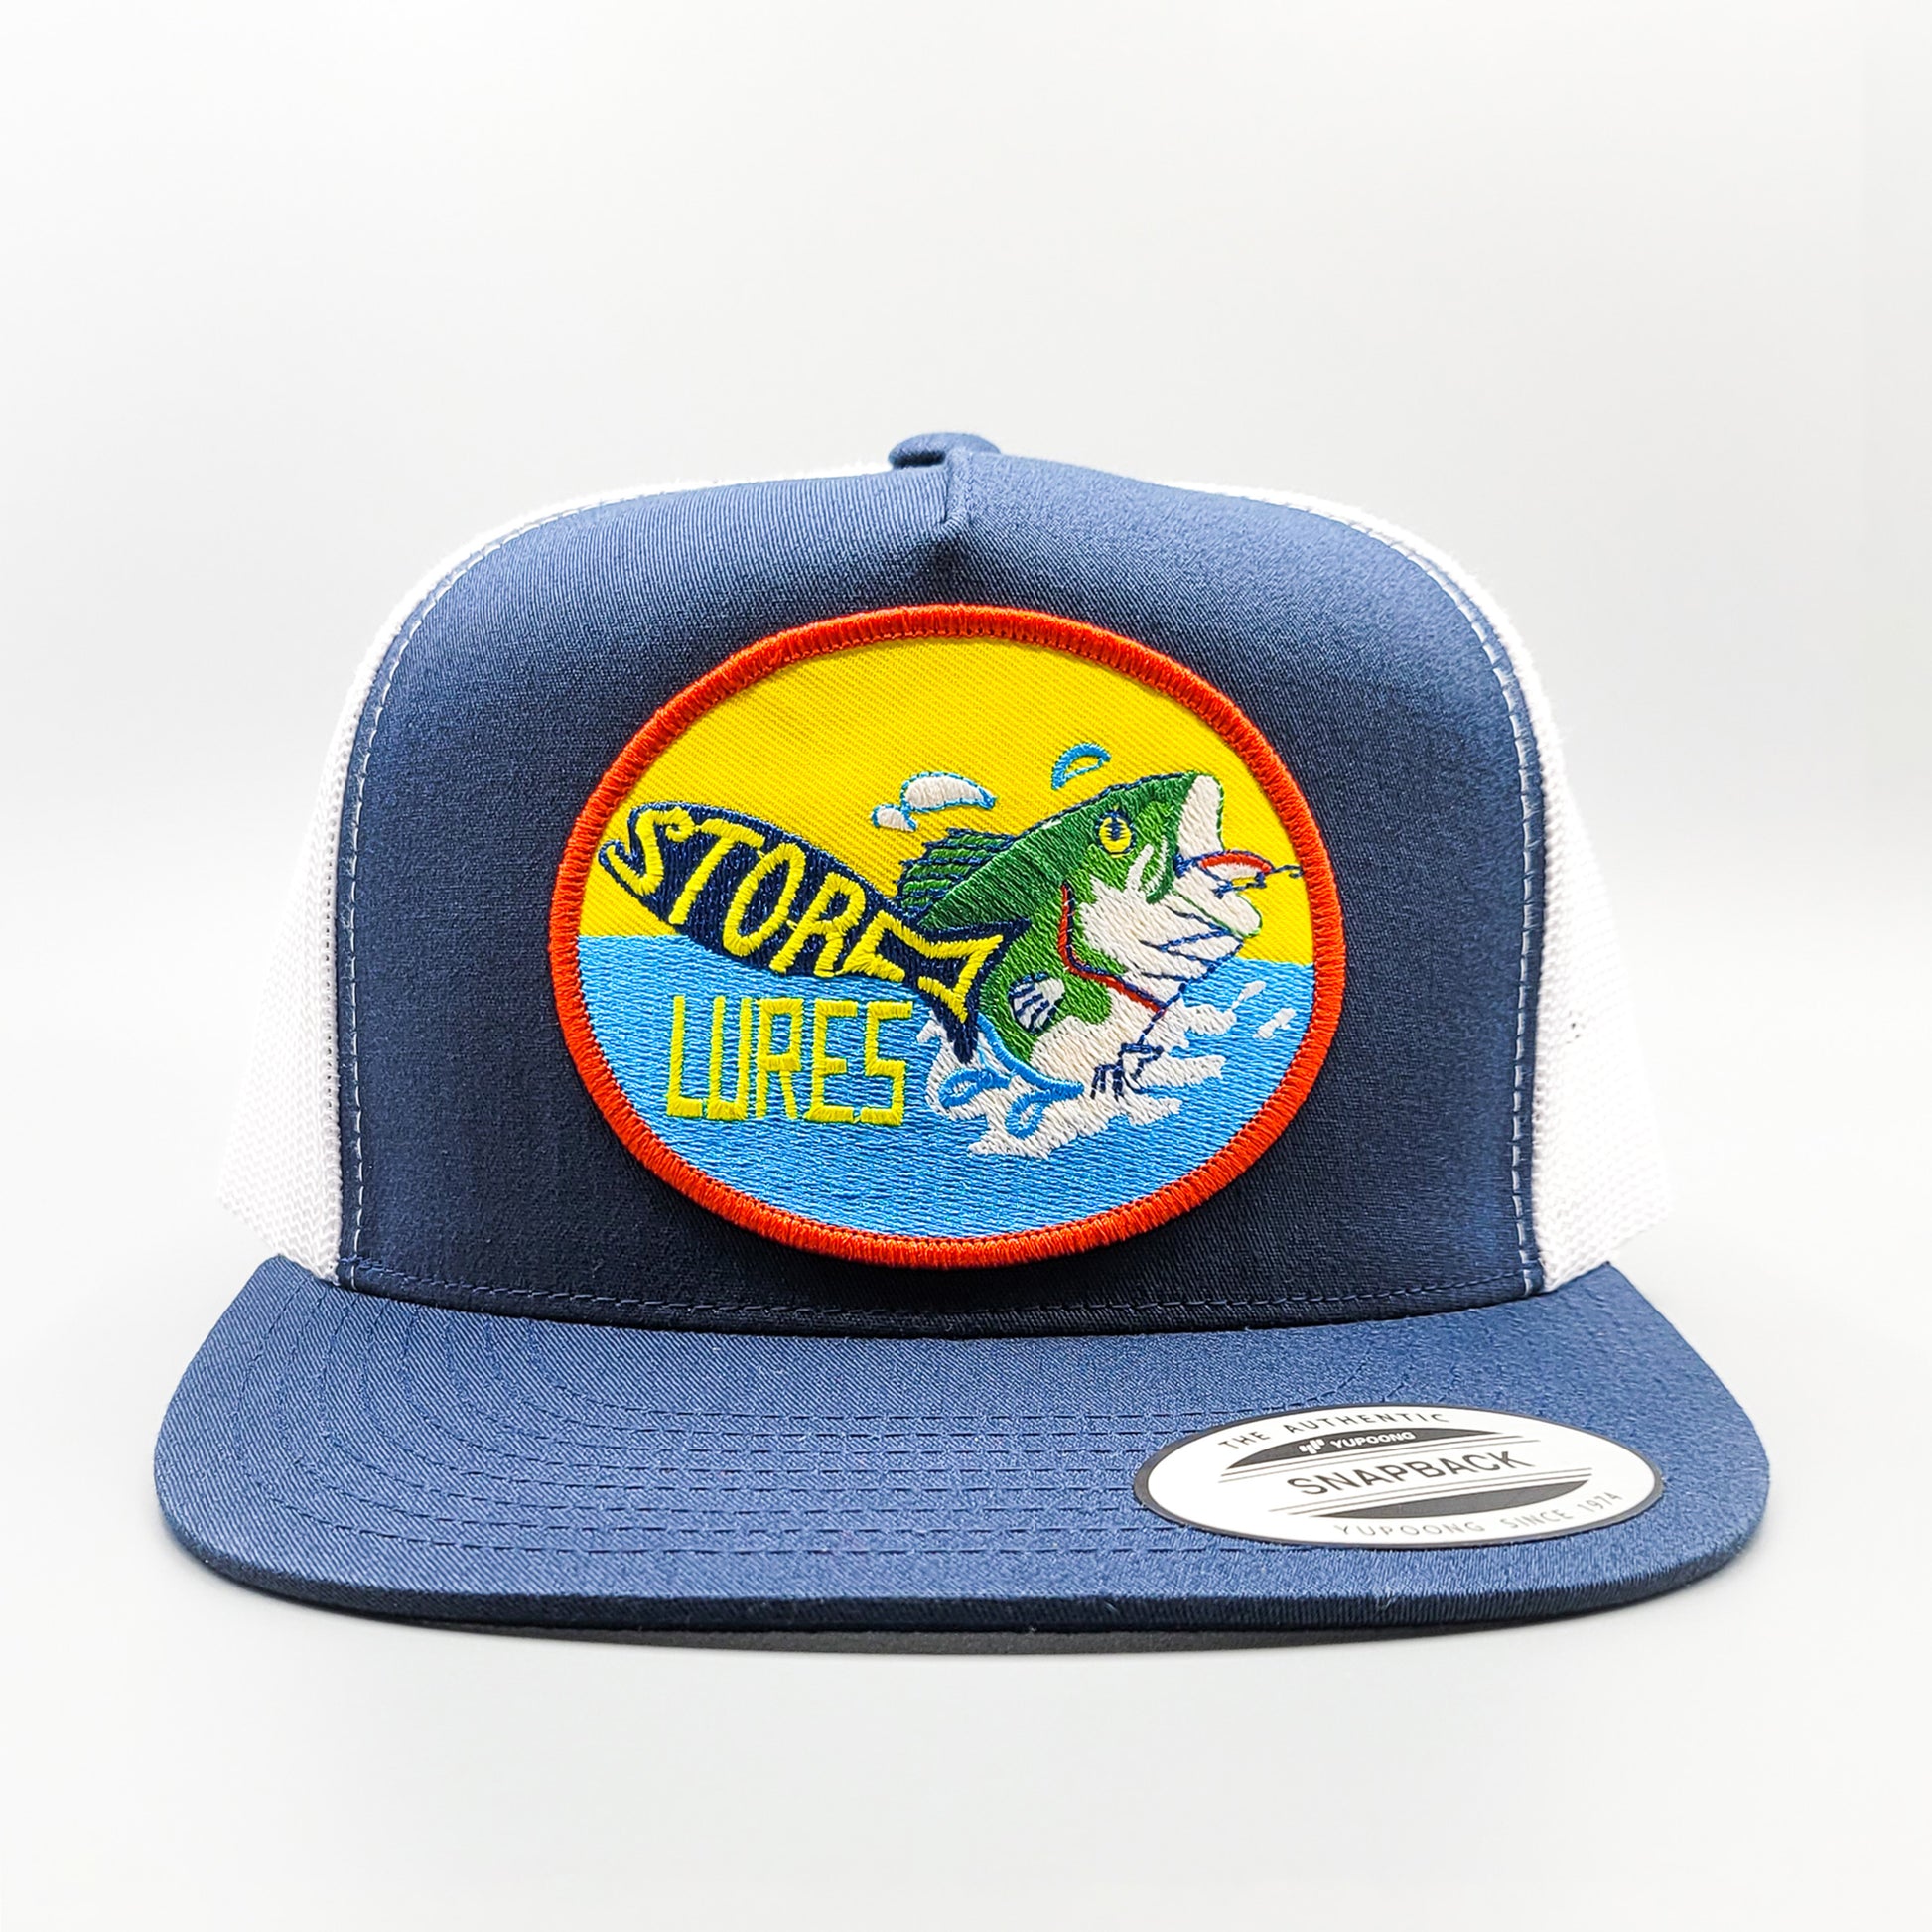 Storm Lures Bass Fishing Trucker Hat, Fish Patch Yupoong 6006 Snapback –  Vintage Truckers